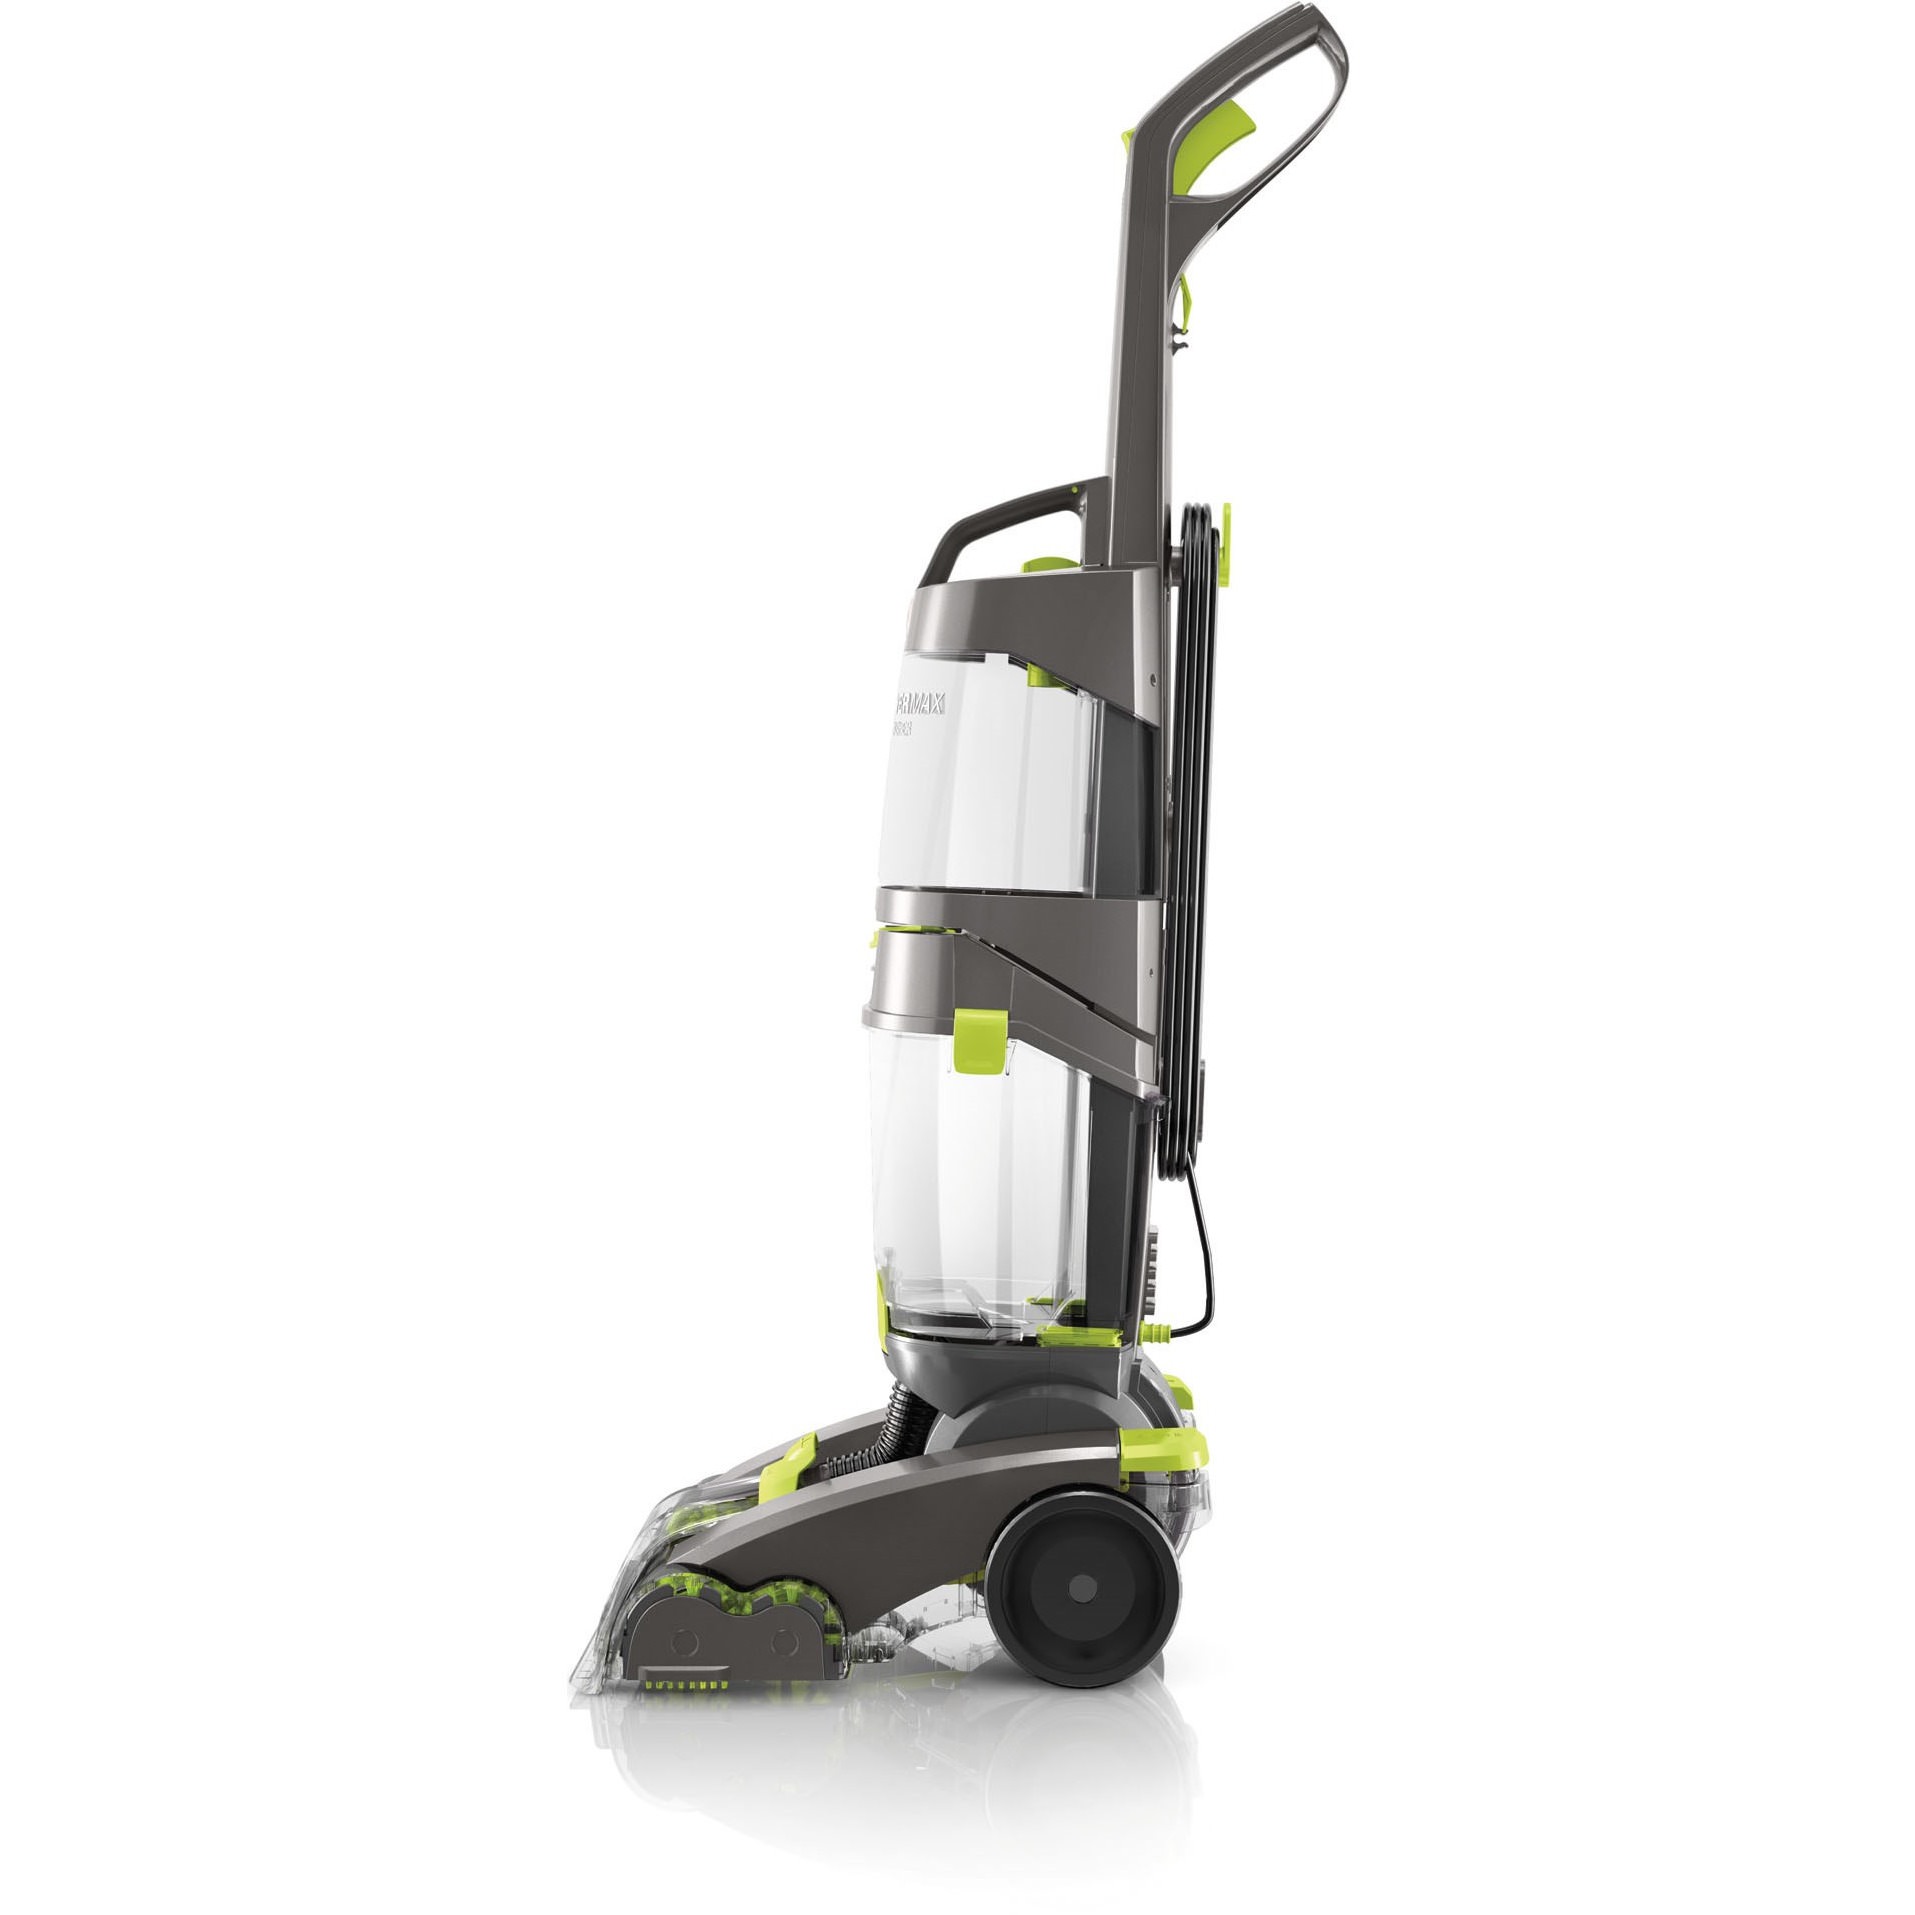 Hoover FH51000 Dual Power Max Upright Carpet Cleaner - image 3 of 5